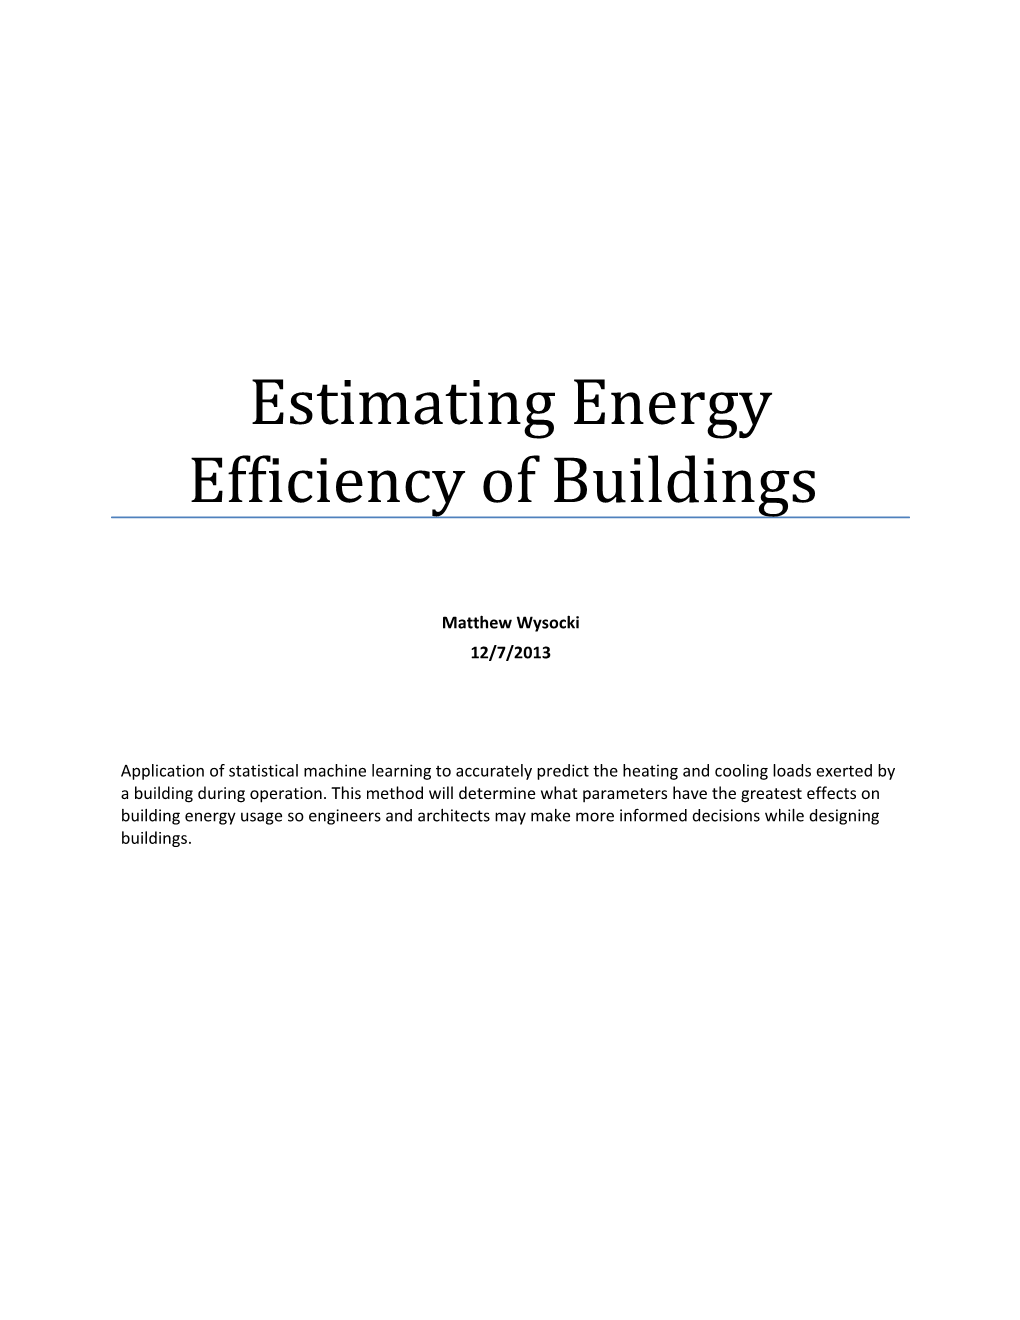 A Great Amount of Effort and Research Has Gone Into Accurately Predicting Building Efficiency;